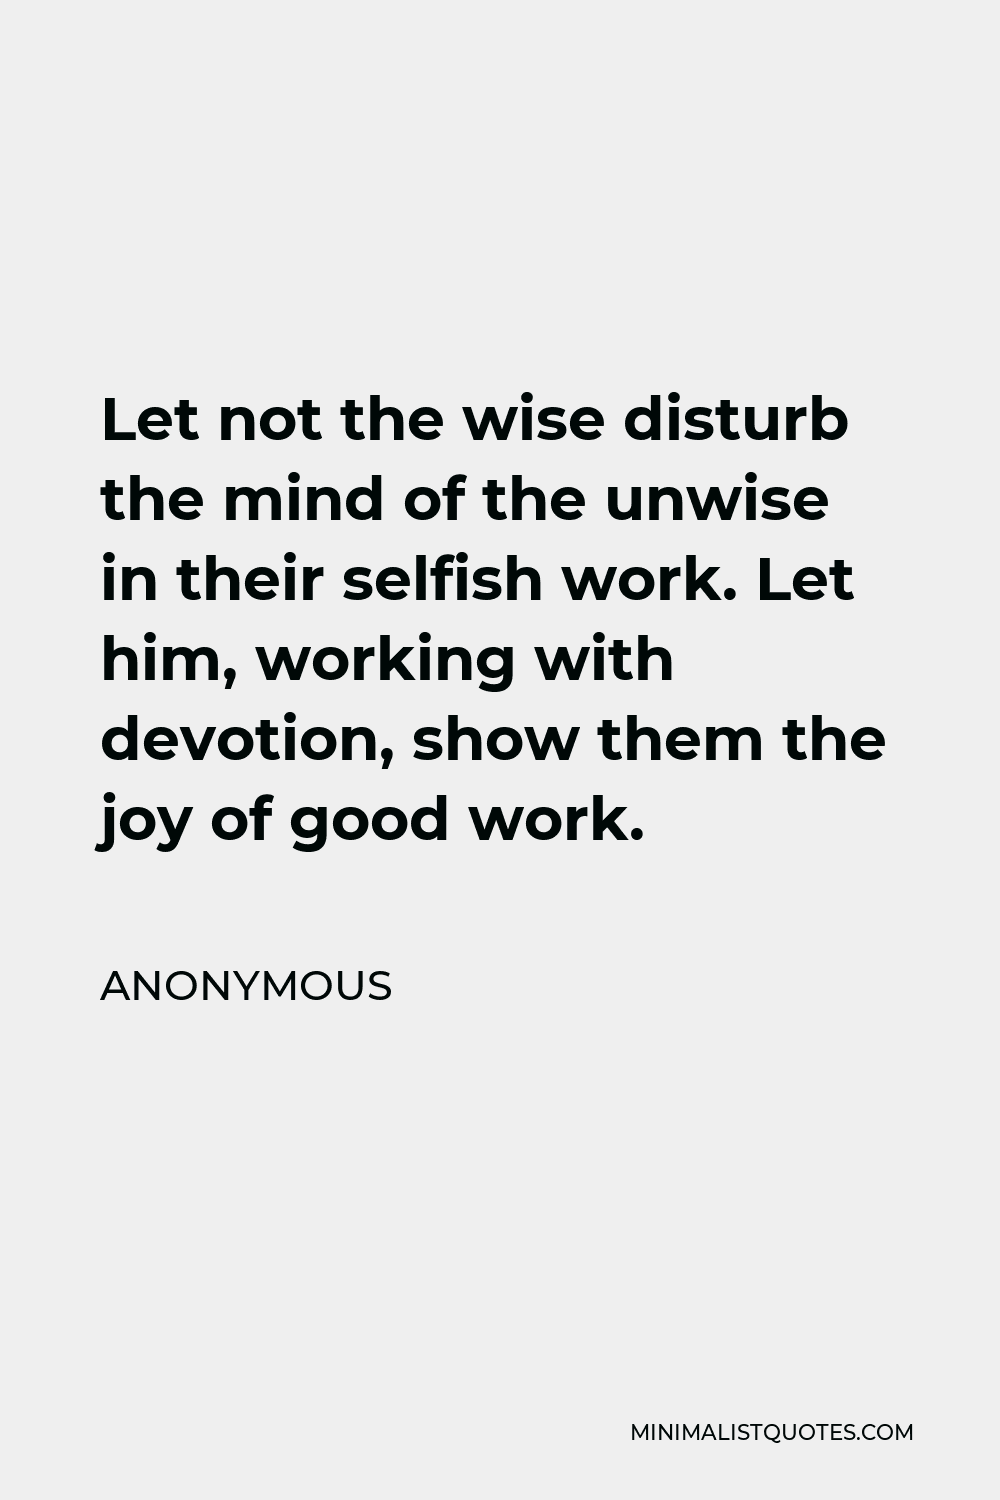 Anonymous Quote - Let not the wise disturb the mind of the unwise in their selfish work. Let him, working with devotion, show them the joy of good work.